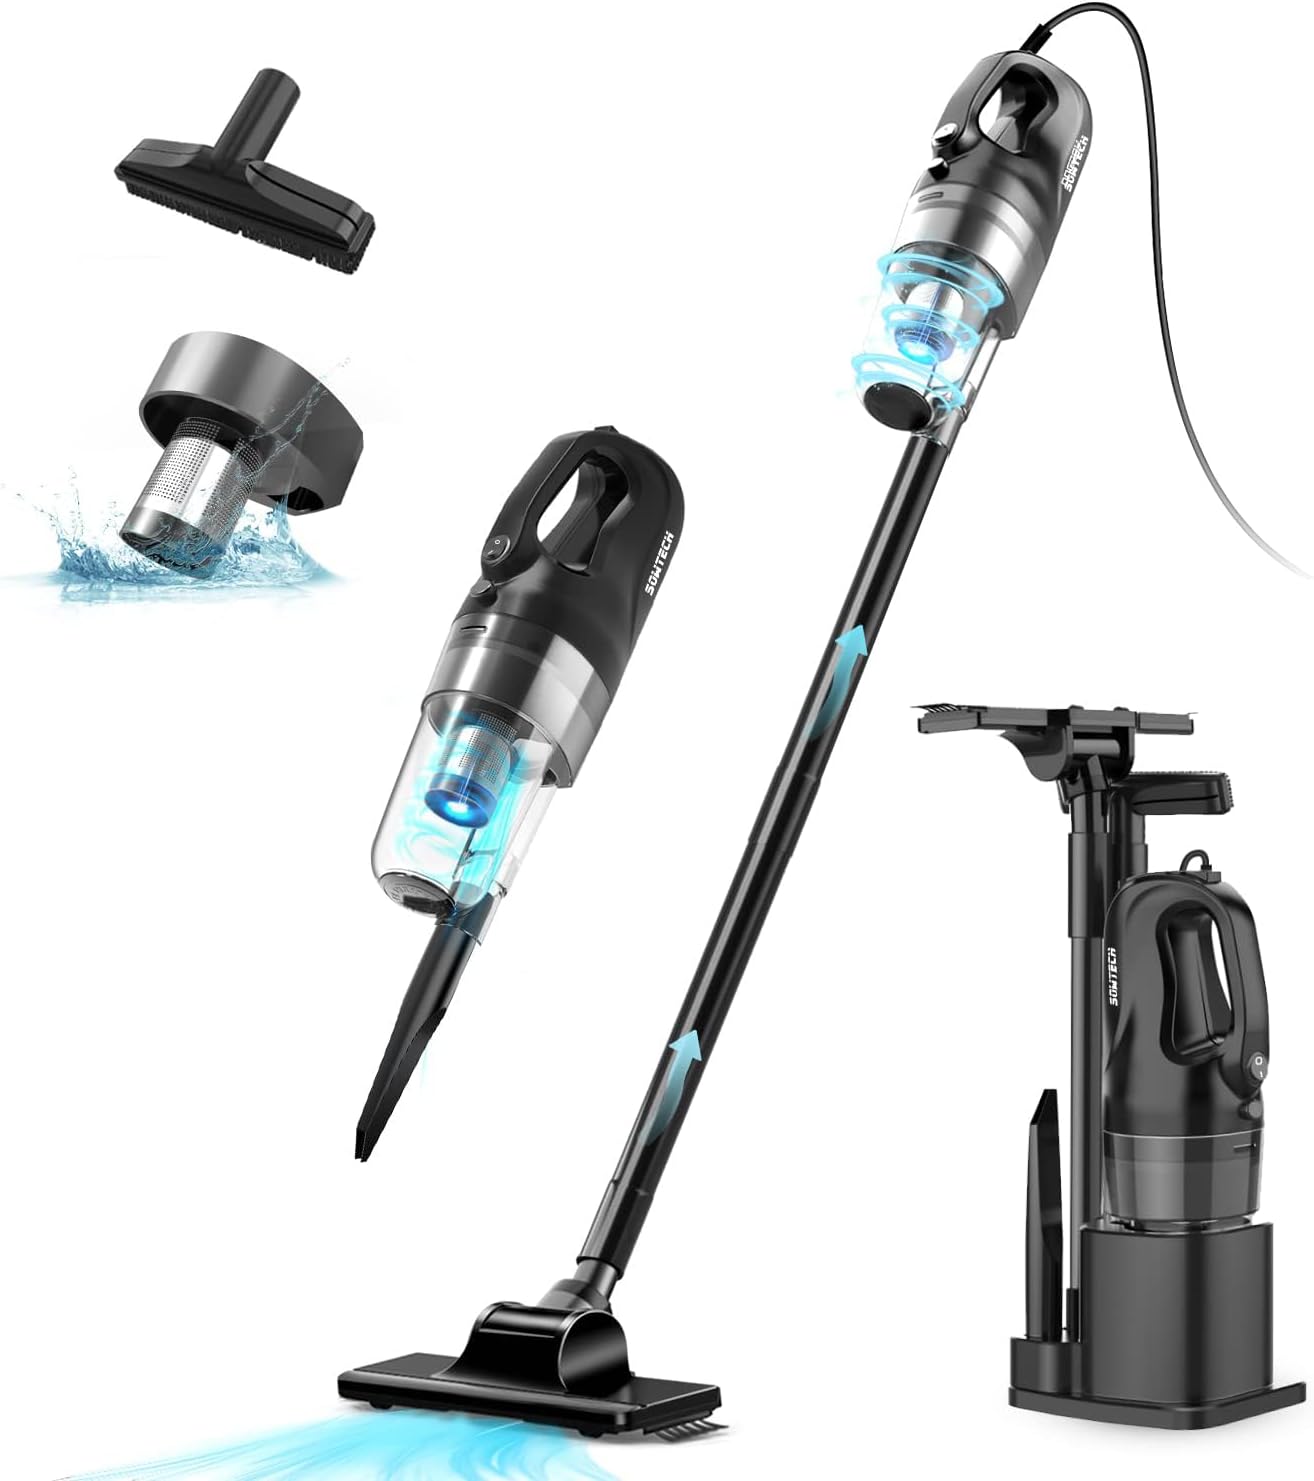 SOWTECH Corded Stick Vacuum Cleaner Review